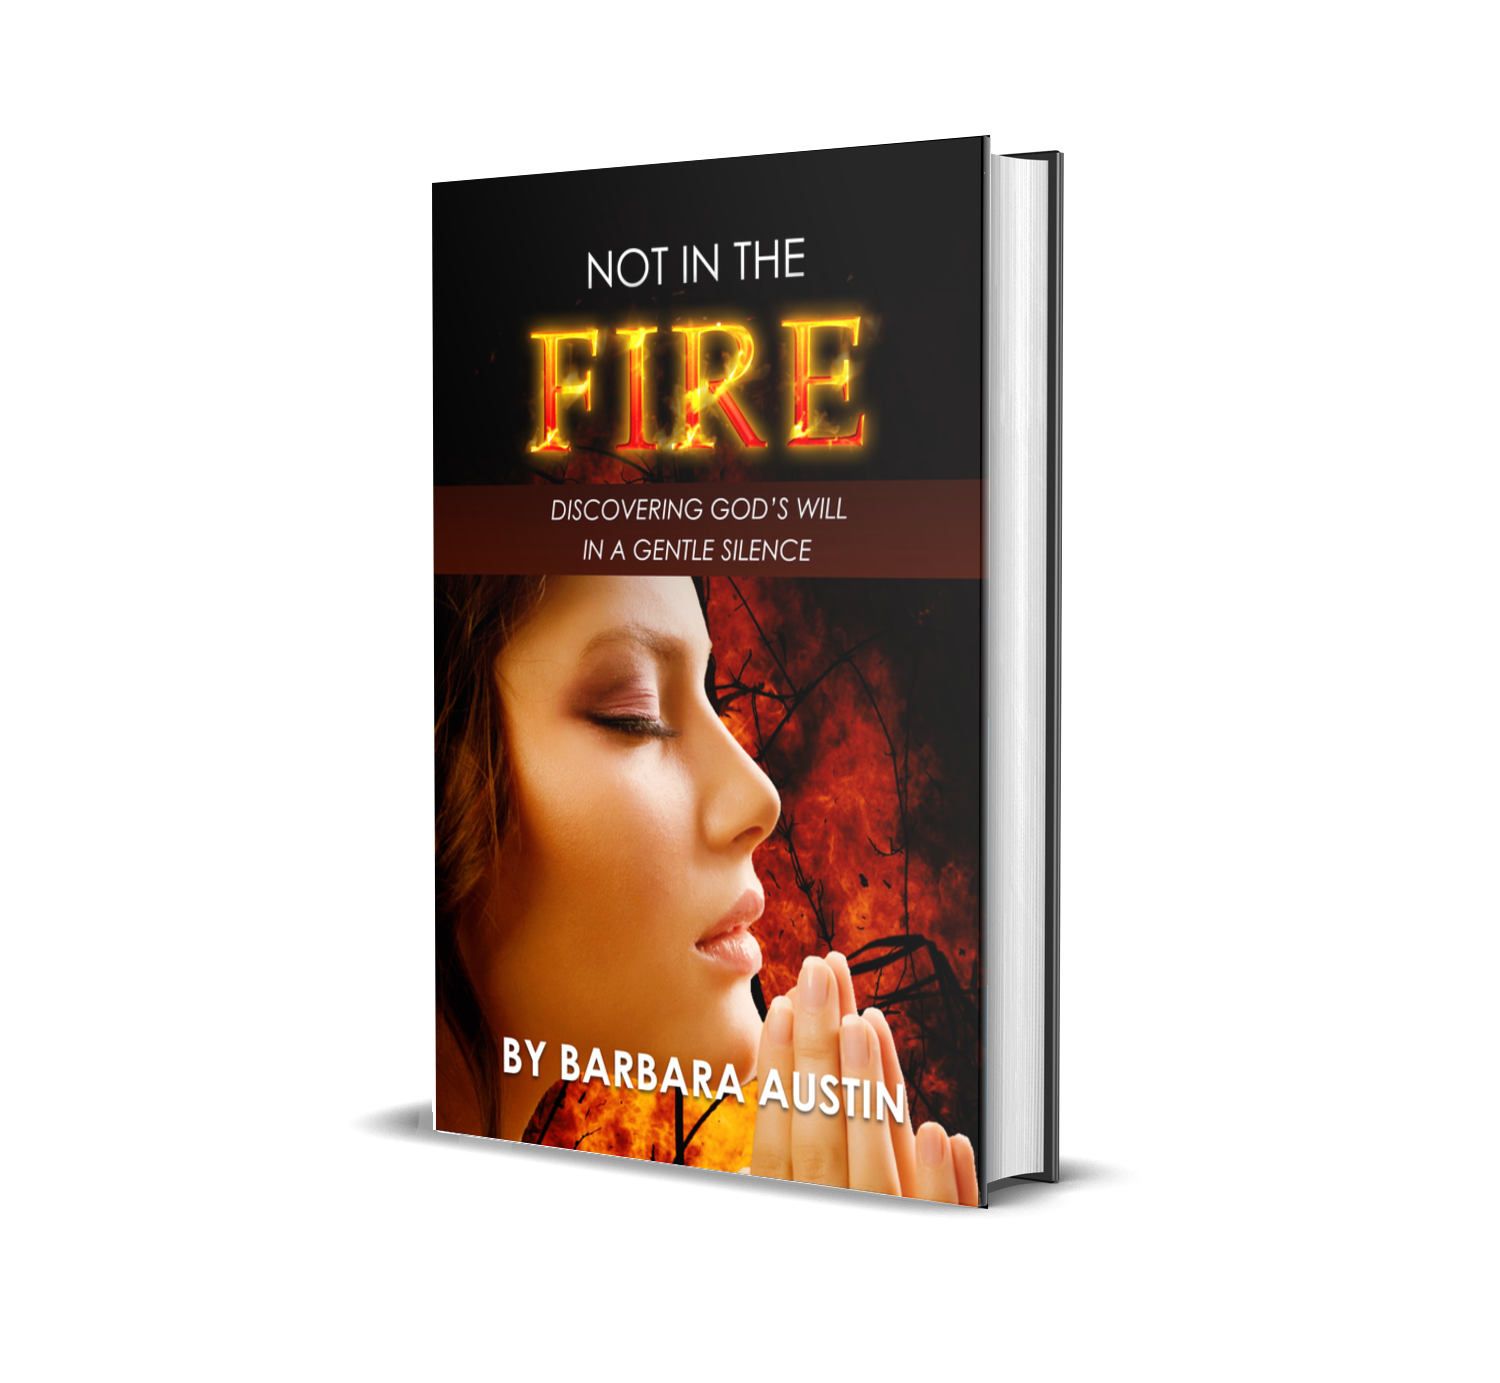 Barbara Austin shares a devastating account of the unimaginable violence, abuse and injury she has witnessed and endured in her new book Not in the fire.